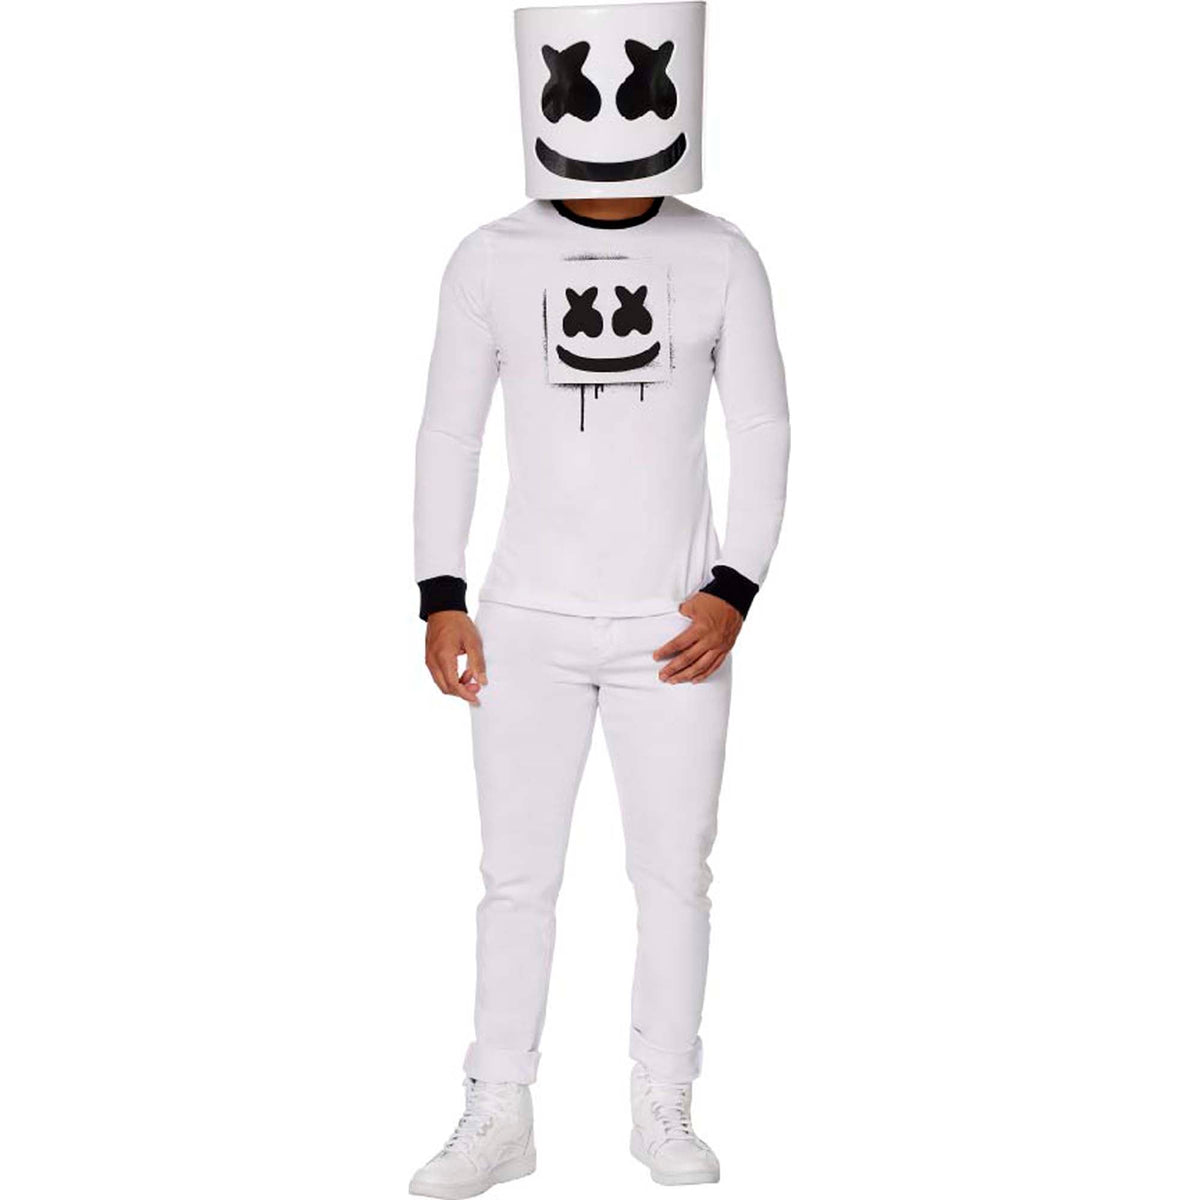 IN SPIRIT DESIGNS Costumes Marshmello Costume for Adults, White Shirt and Mask